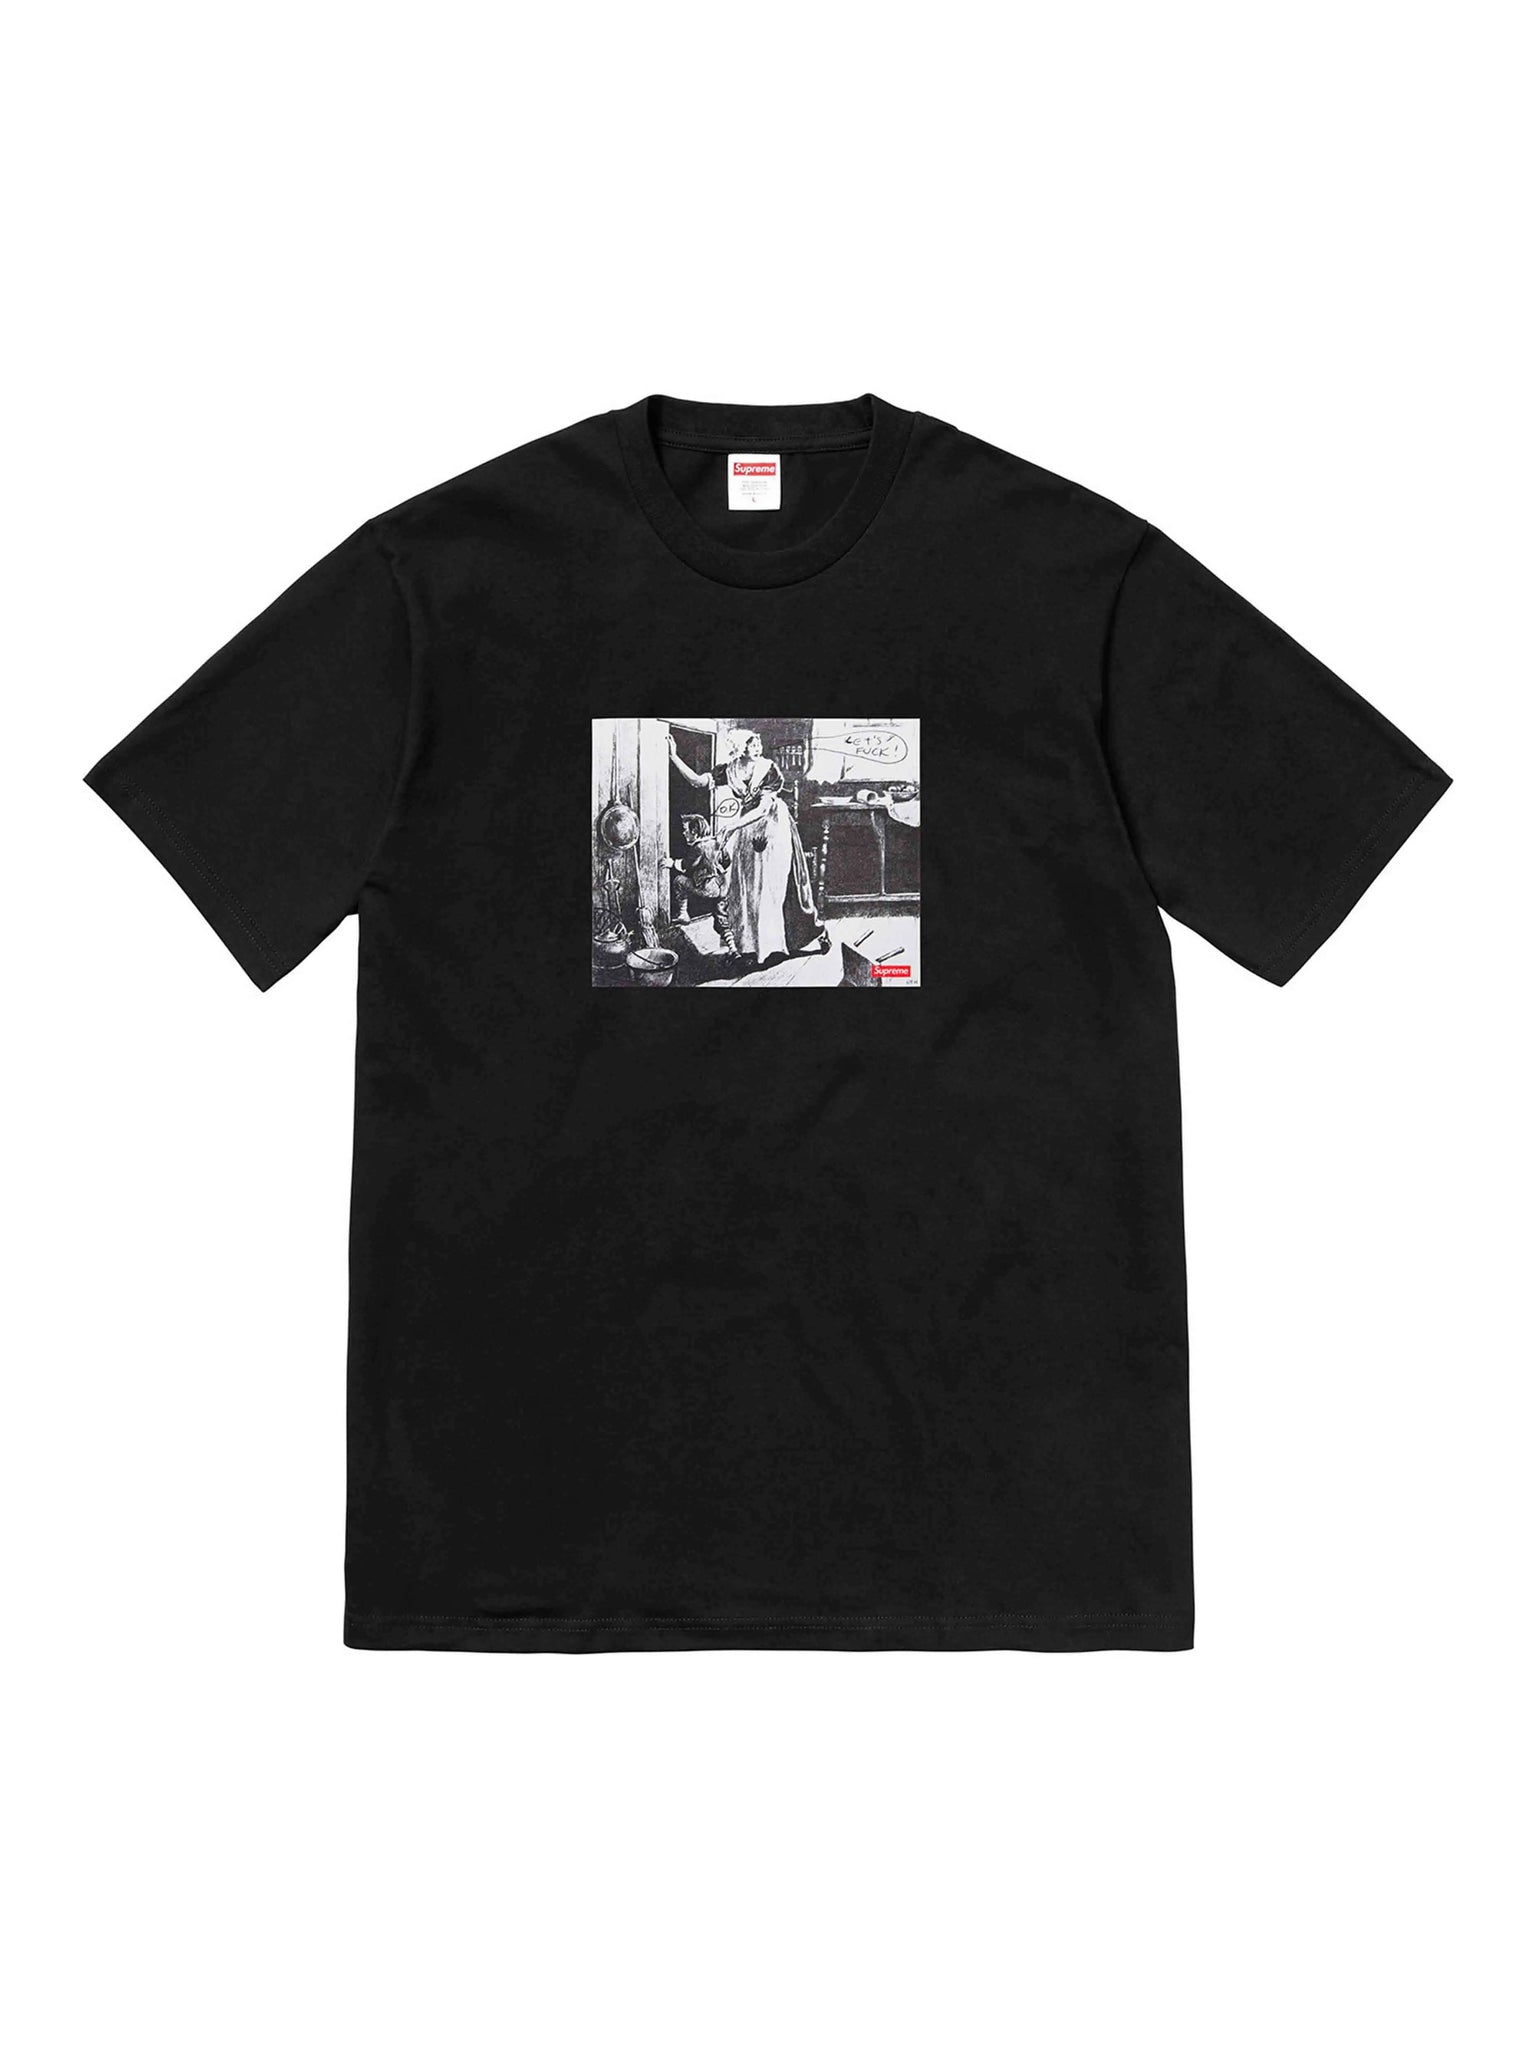 Supreme X Mike Kelley Hiding From Indians Tee Black [FW18] Supreme